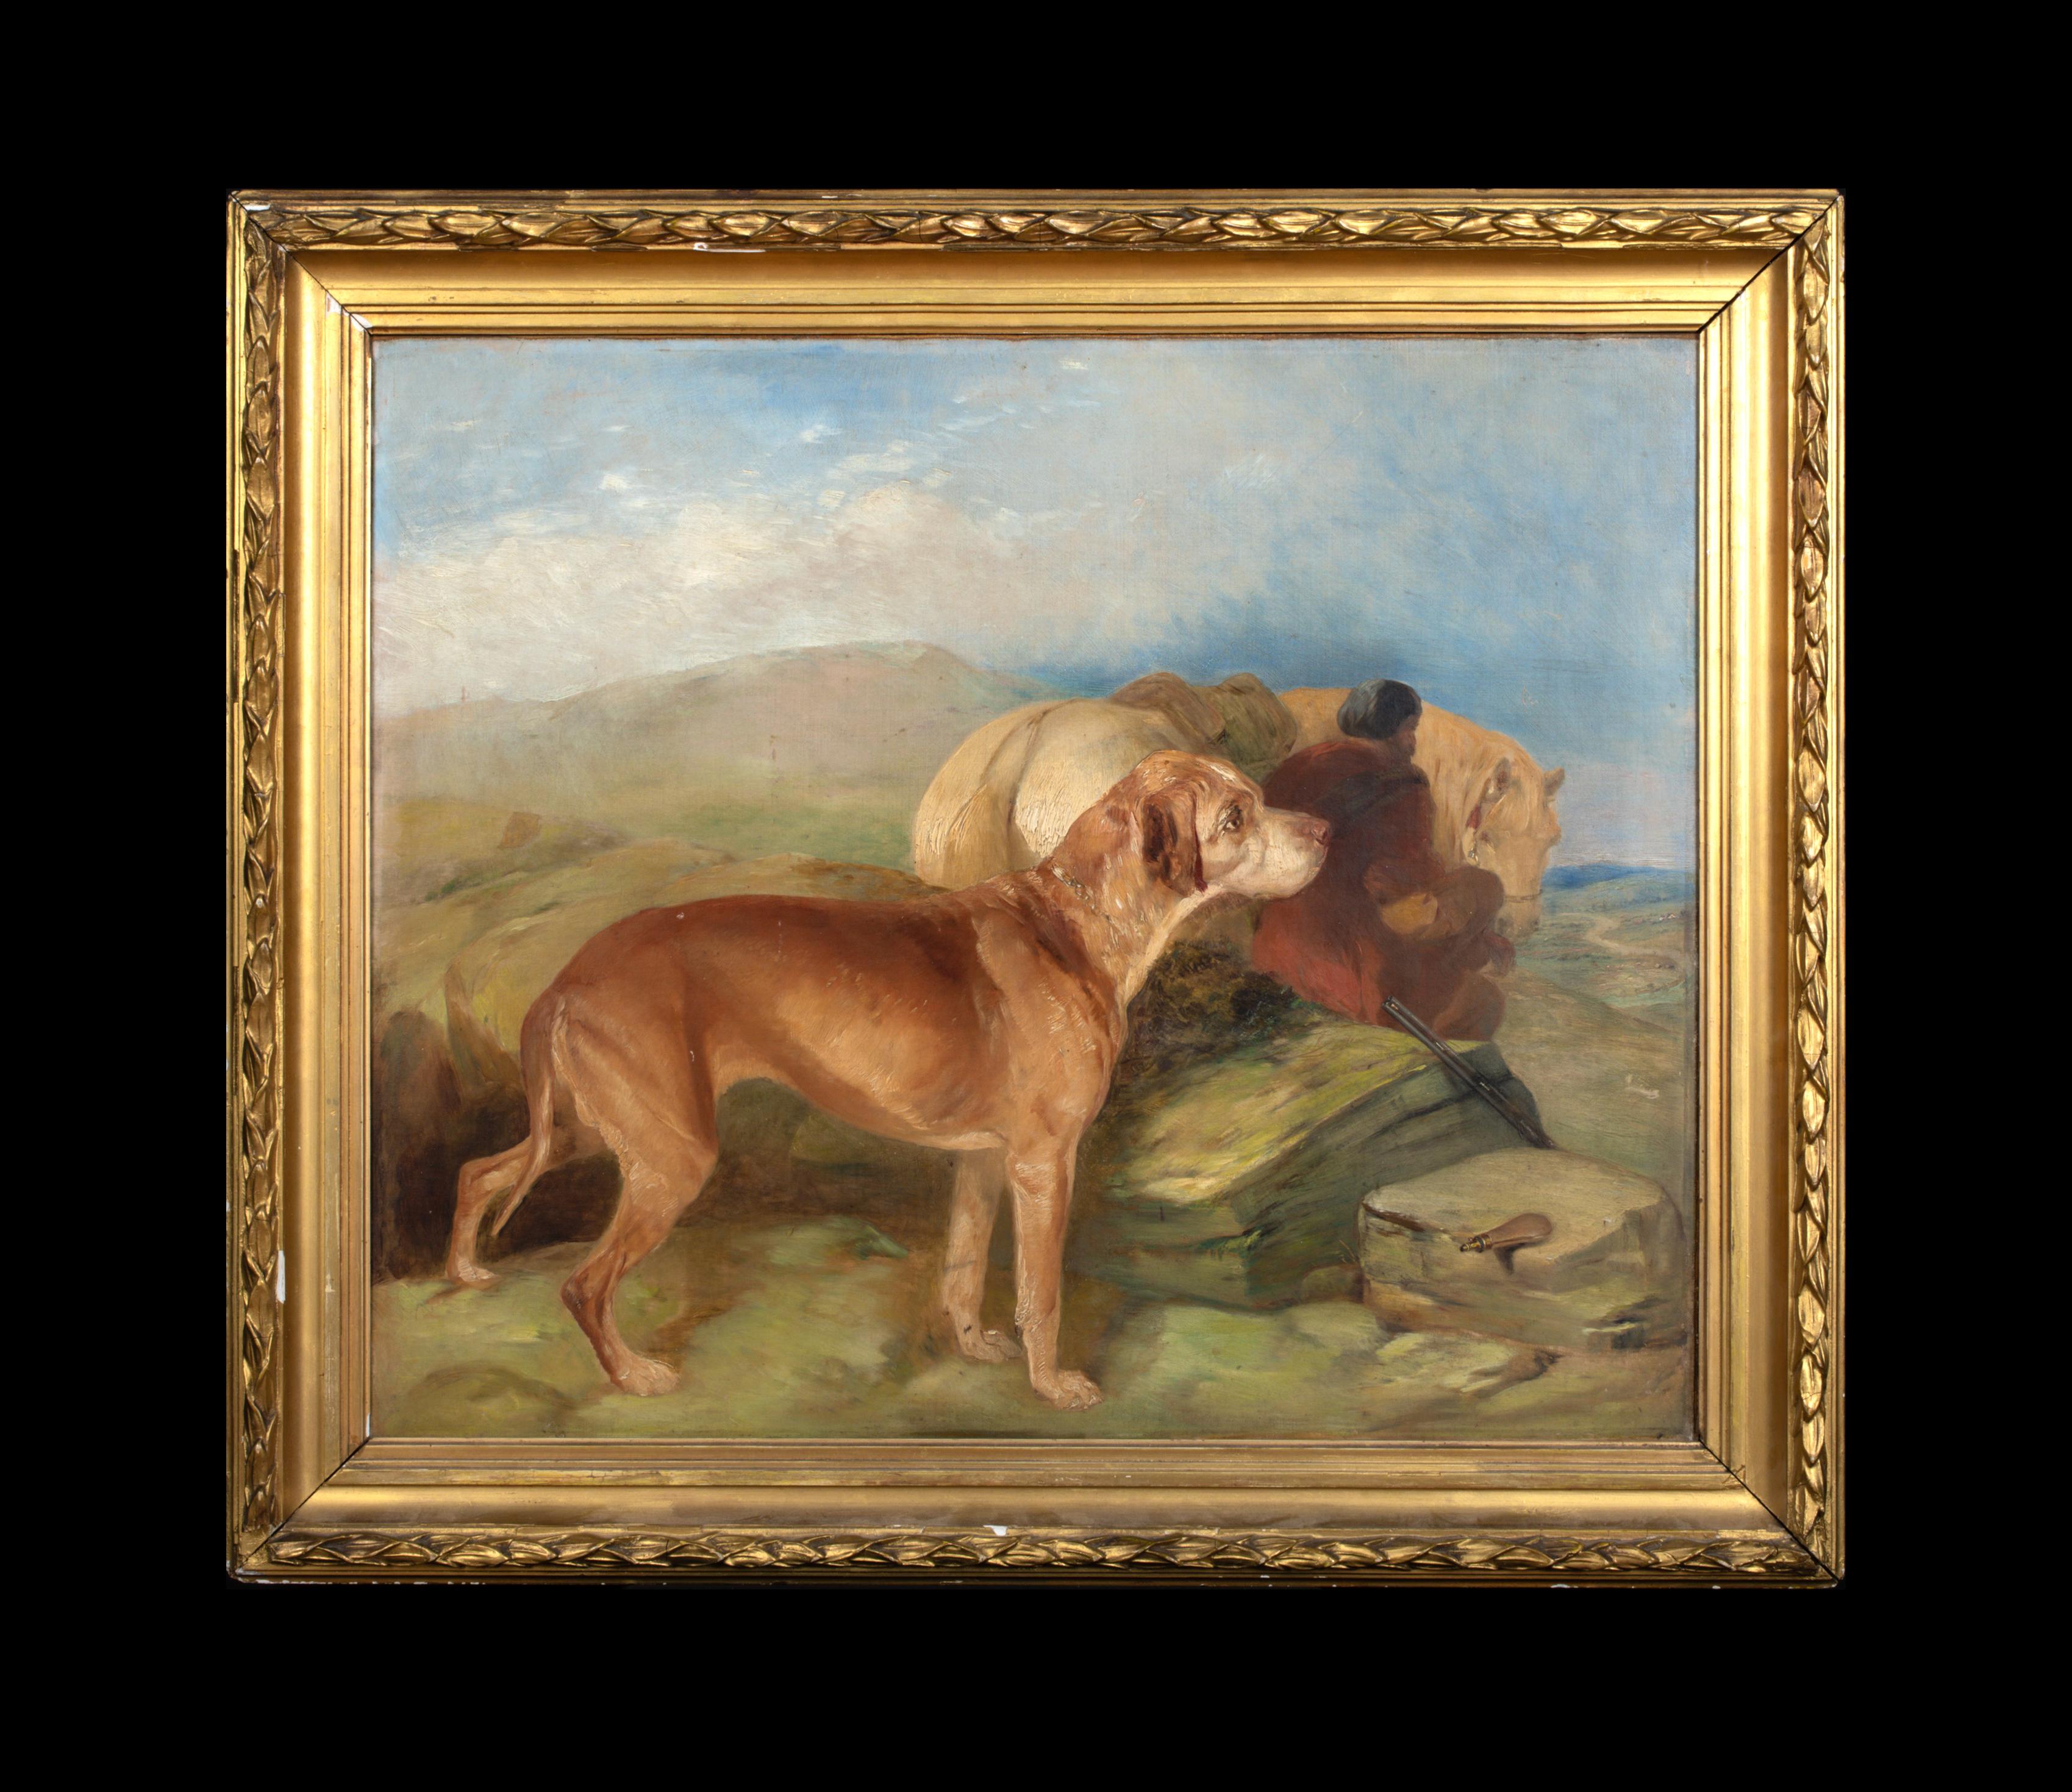 Arabian Horse & Dog Resting, 19th Century

circle of SIR EDWIN HENRY LANDSEER (1802-1873) - Christies London Provenance

Large 19th Century Orientalist portrait of an Ottoman hunter, white horse and hound dog, oil on canvas. Excellent quality and